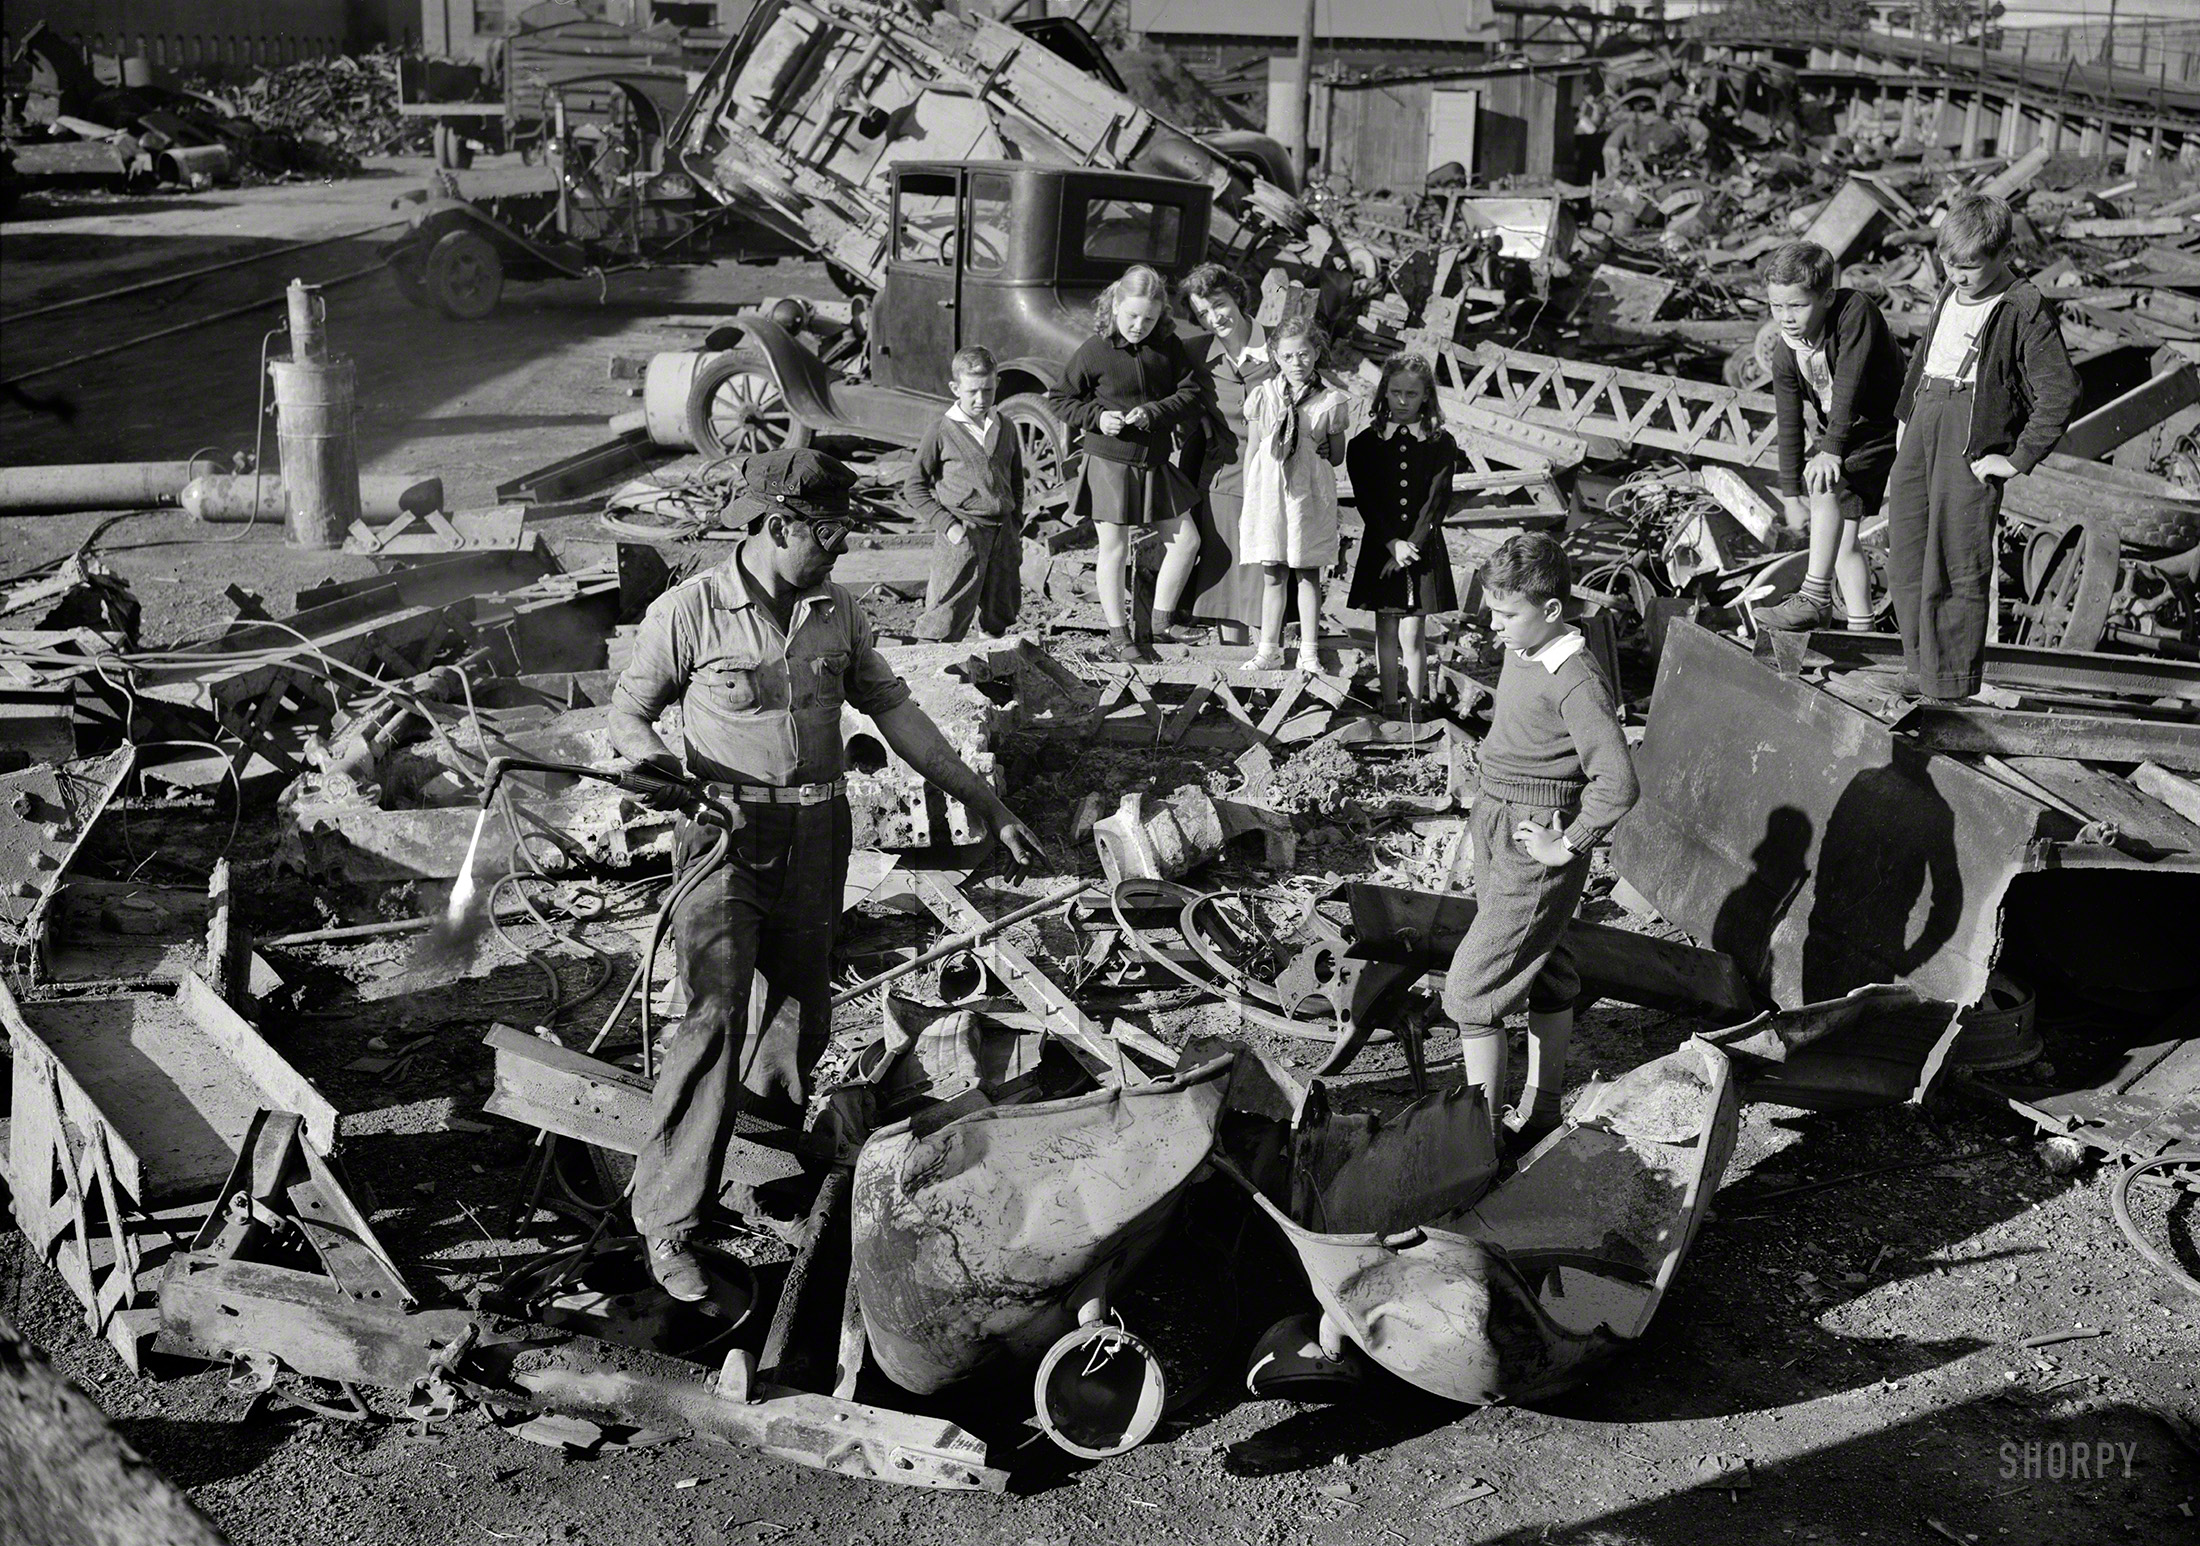 October 1942. "Manpower, junior size. Proud young fighters in Uncle Sam's junior army visit a scrap yard in Roanoke, Virginia, to see for themselves what happens to the scrap they collect for our war industries. One of the workers explains to the children how the acetylene torch he holds cuts heavy metal into the shapes required for melting by the steel mills." 4x5 inch nitrate negative by Valentino Sarra for the Office of War Information. View full size.